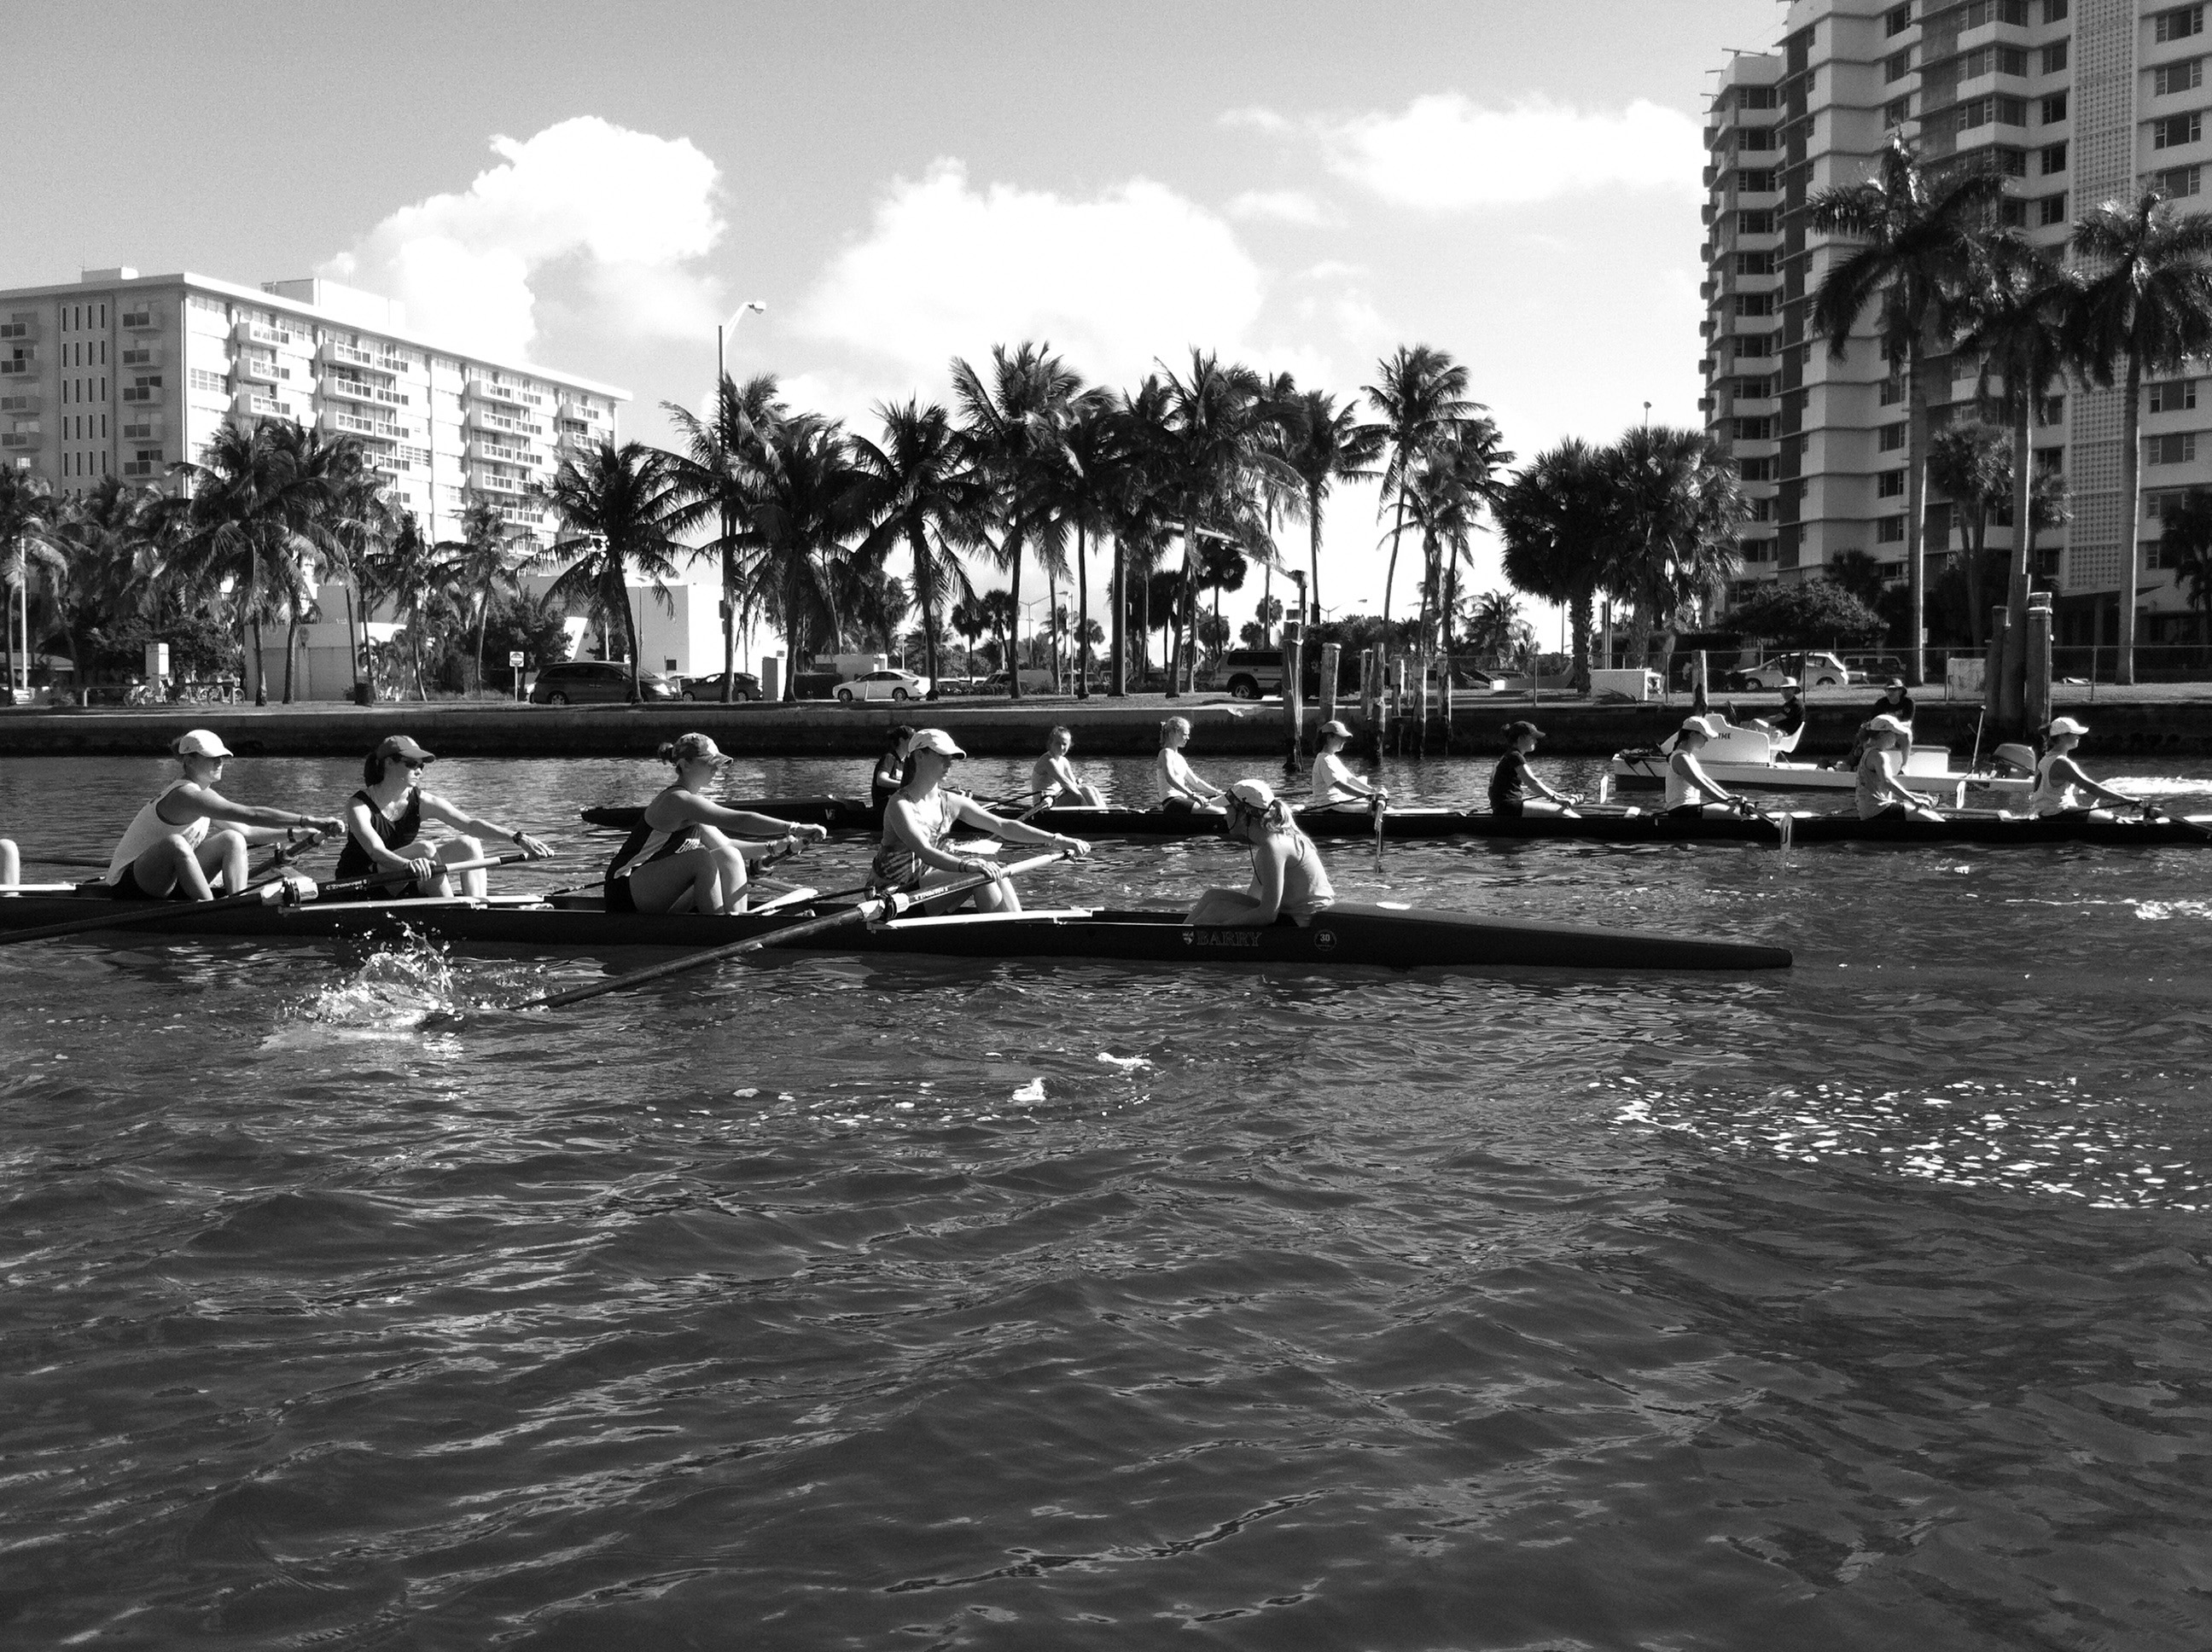 Lauren Lapoint | The BucknellianWomen rowers perfecting their technique. The Bison finished 28 training sessions overall in the warm Miami weather.